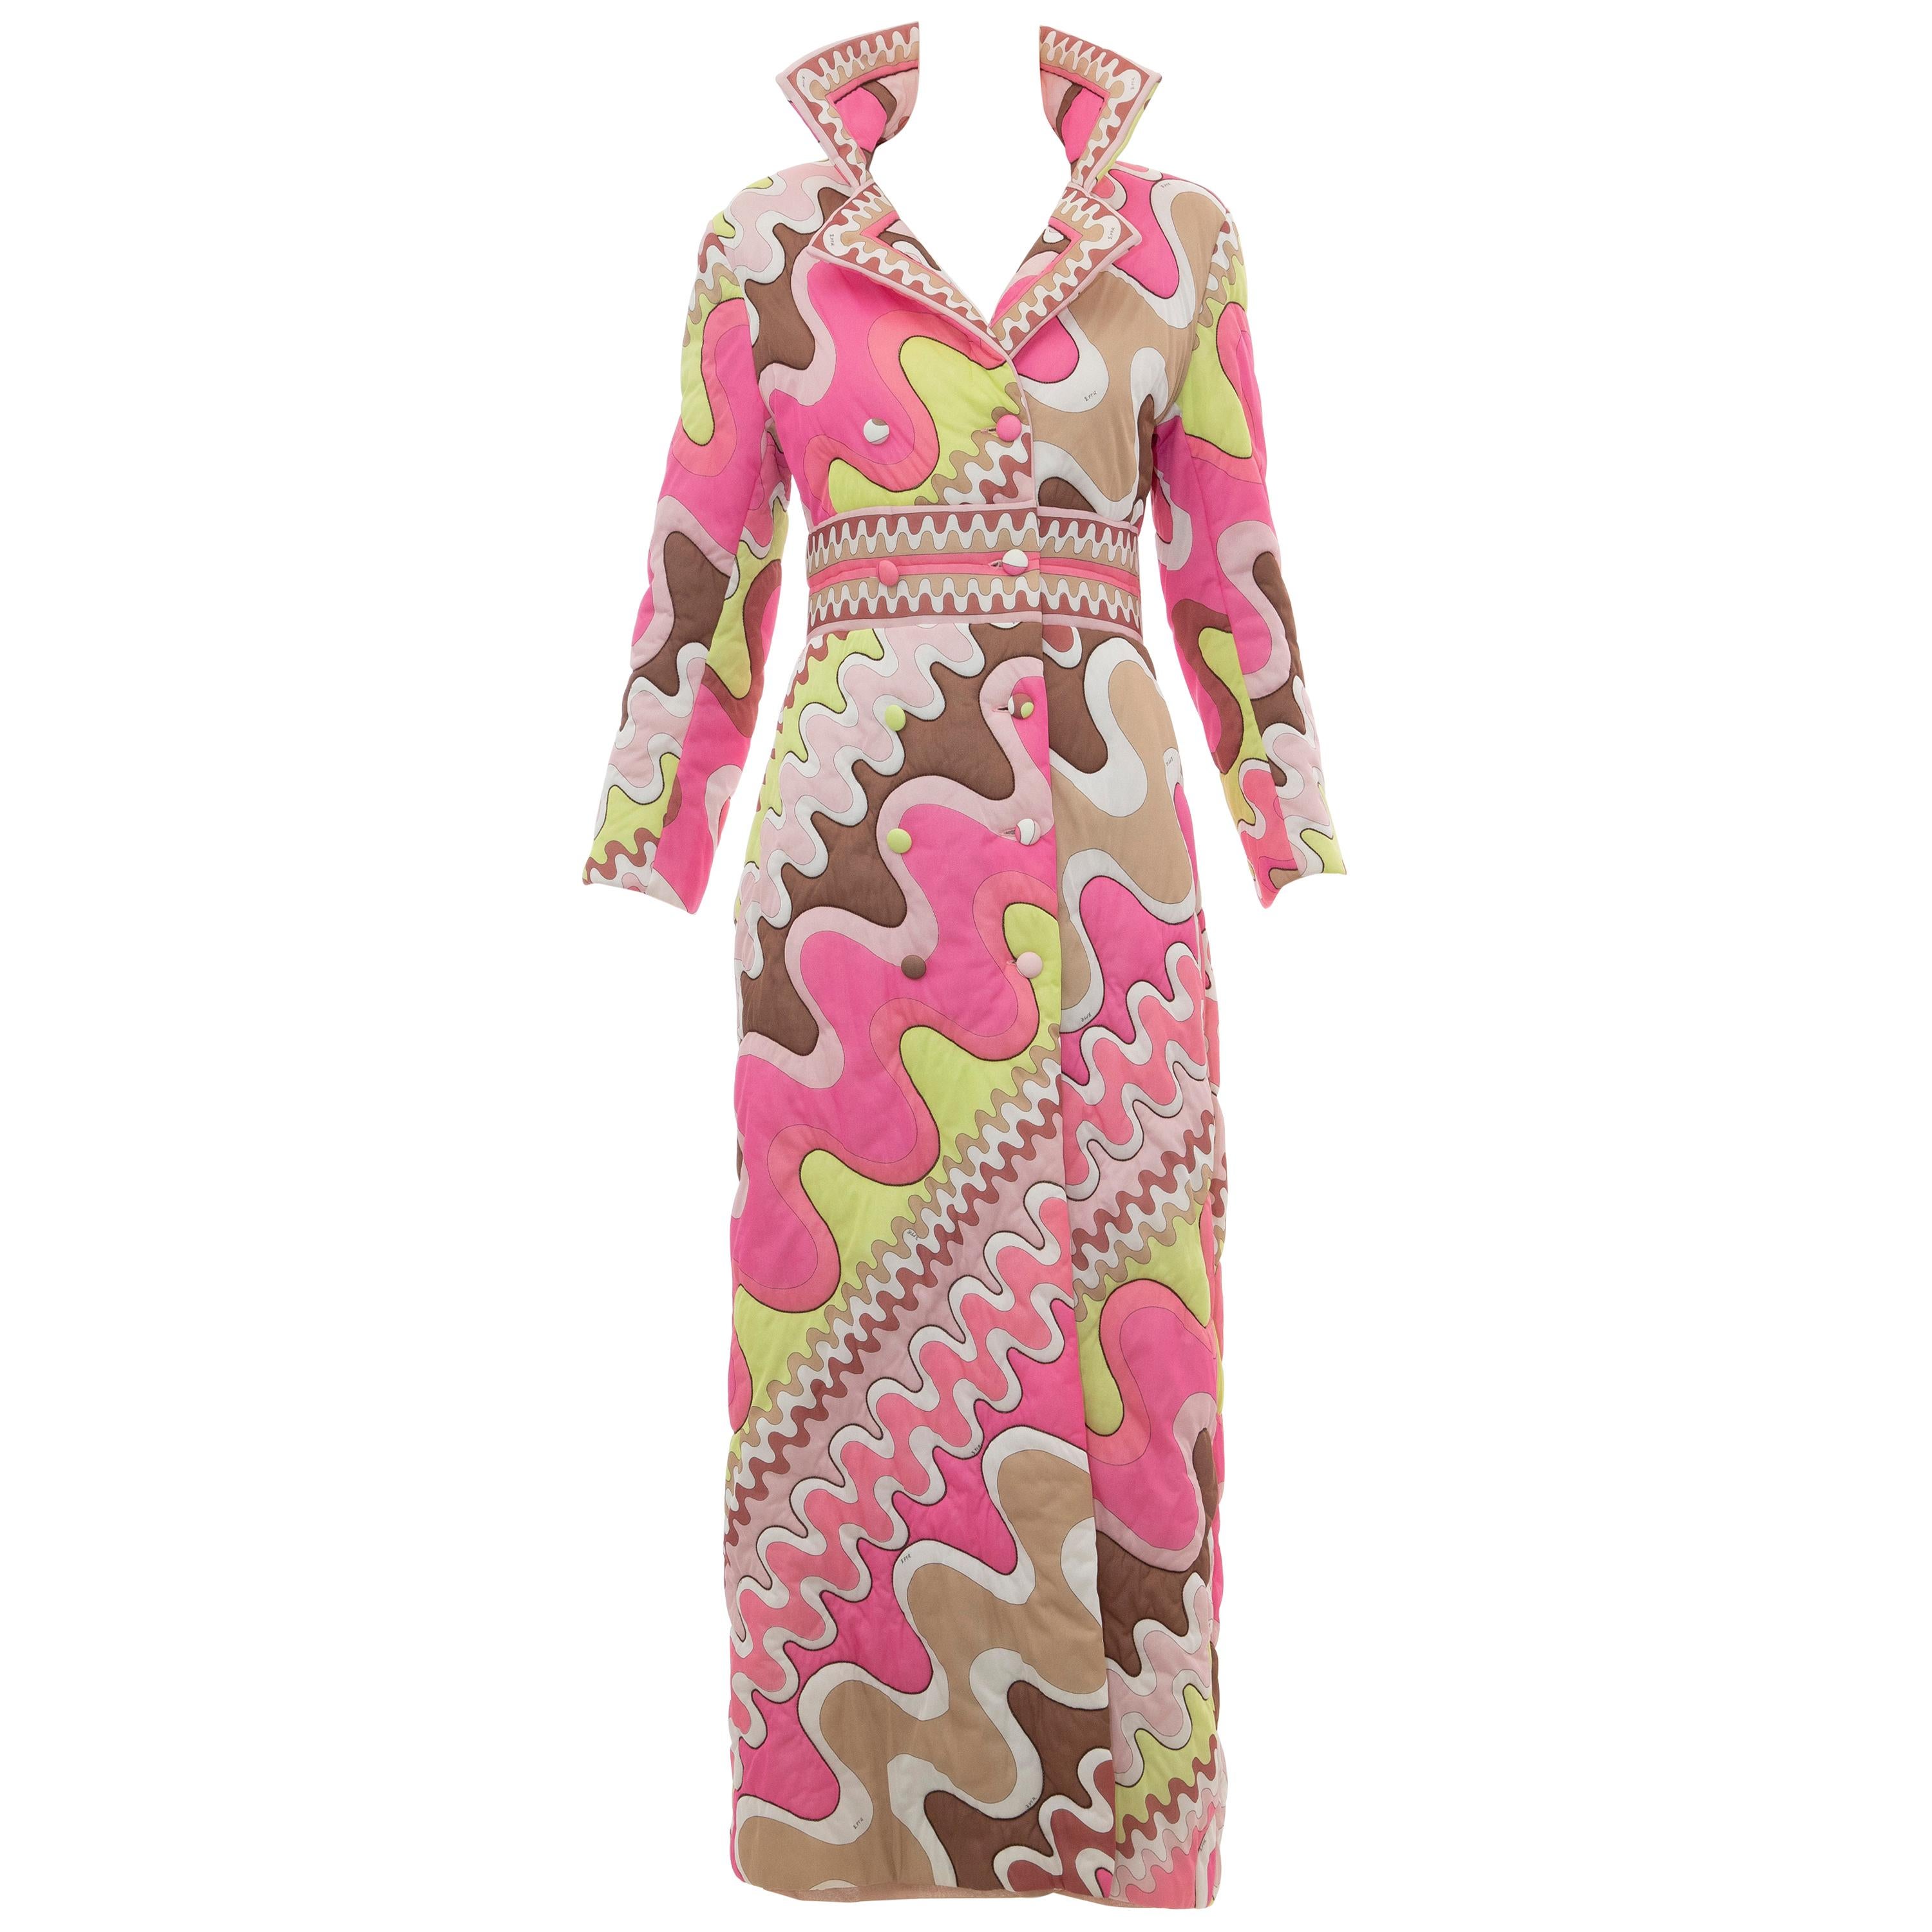 Emilio Pucci Double-Breasted Abstract Print Quilted Coat, Circa: 1970's